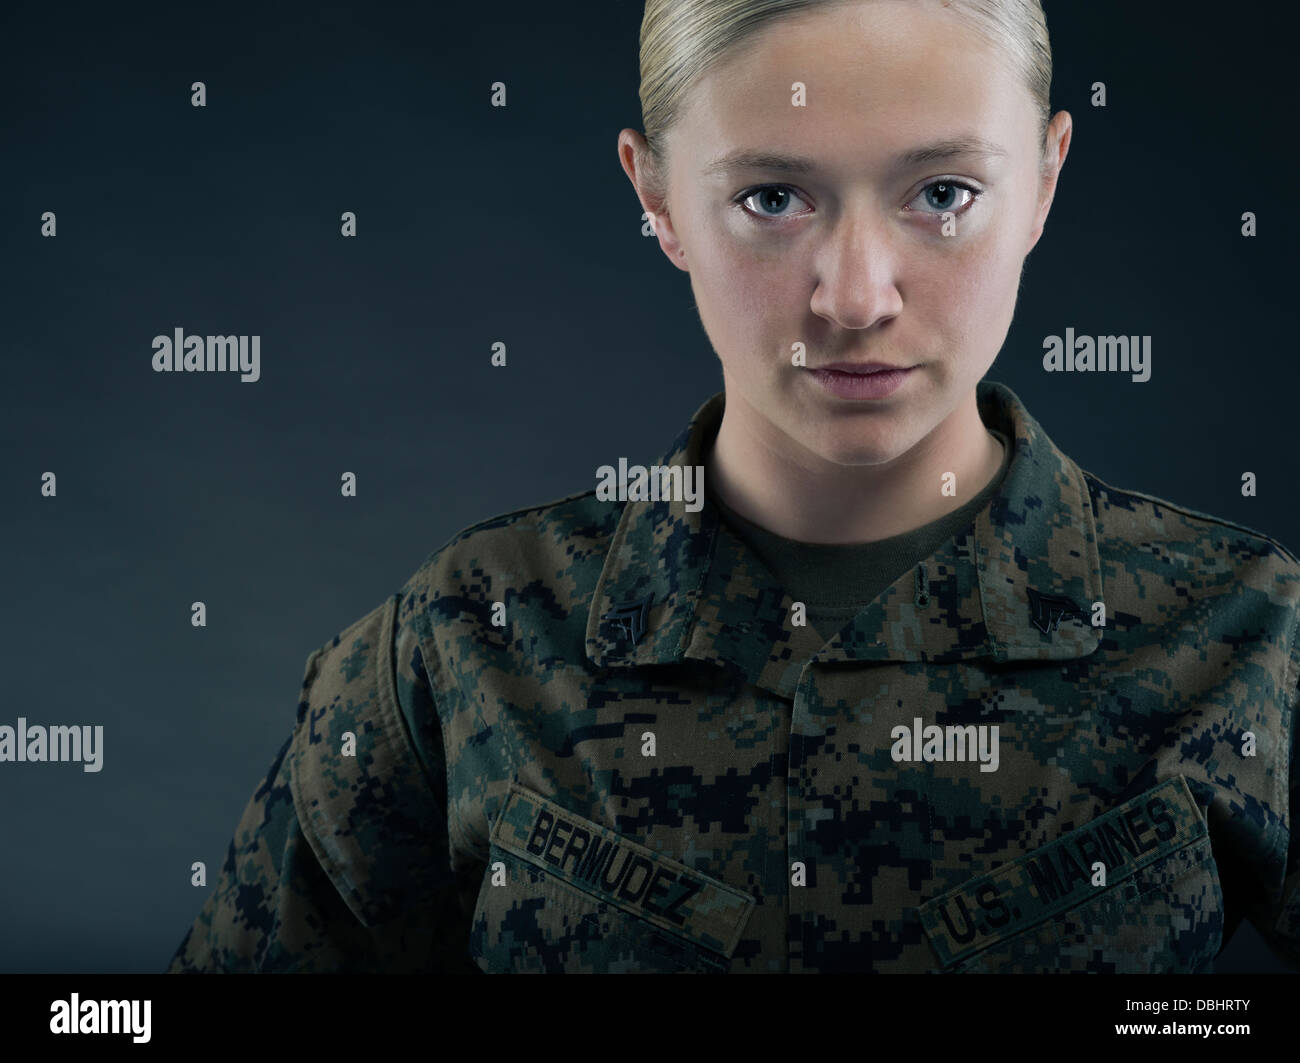 Portrait of Female United States Marine Corps Soldier in utility uniform MARPAT pixelated camouflage Stock Photo